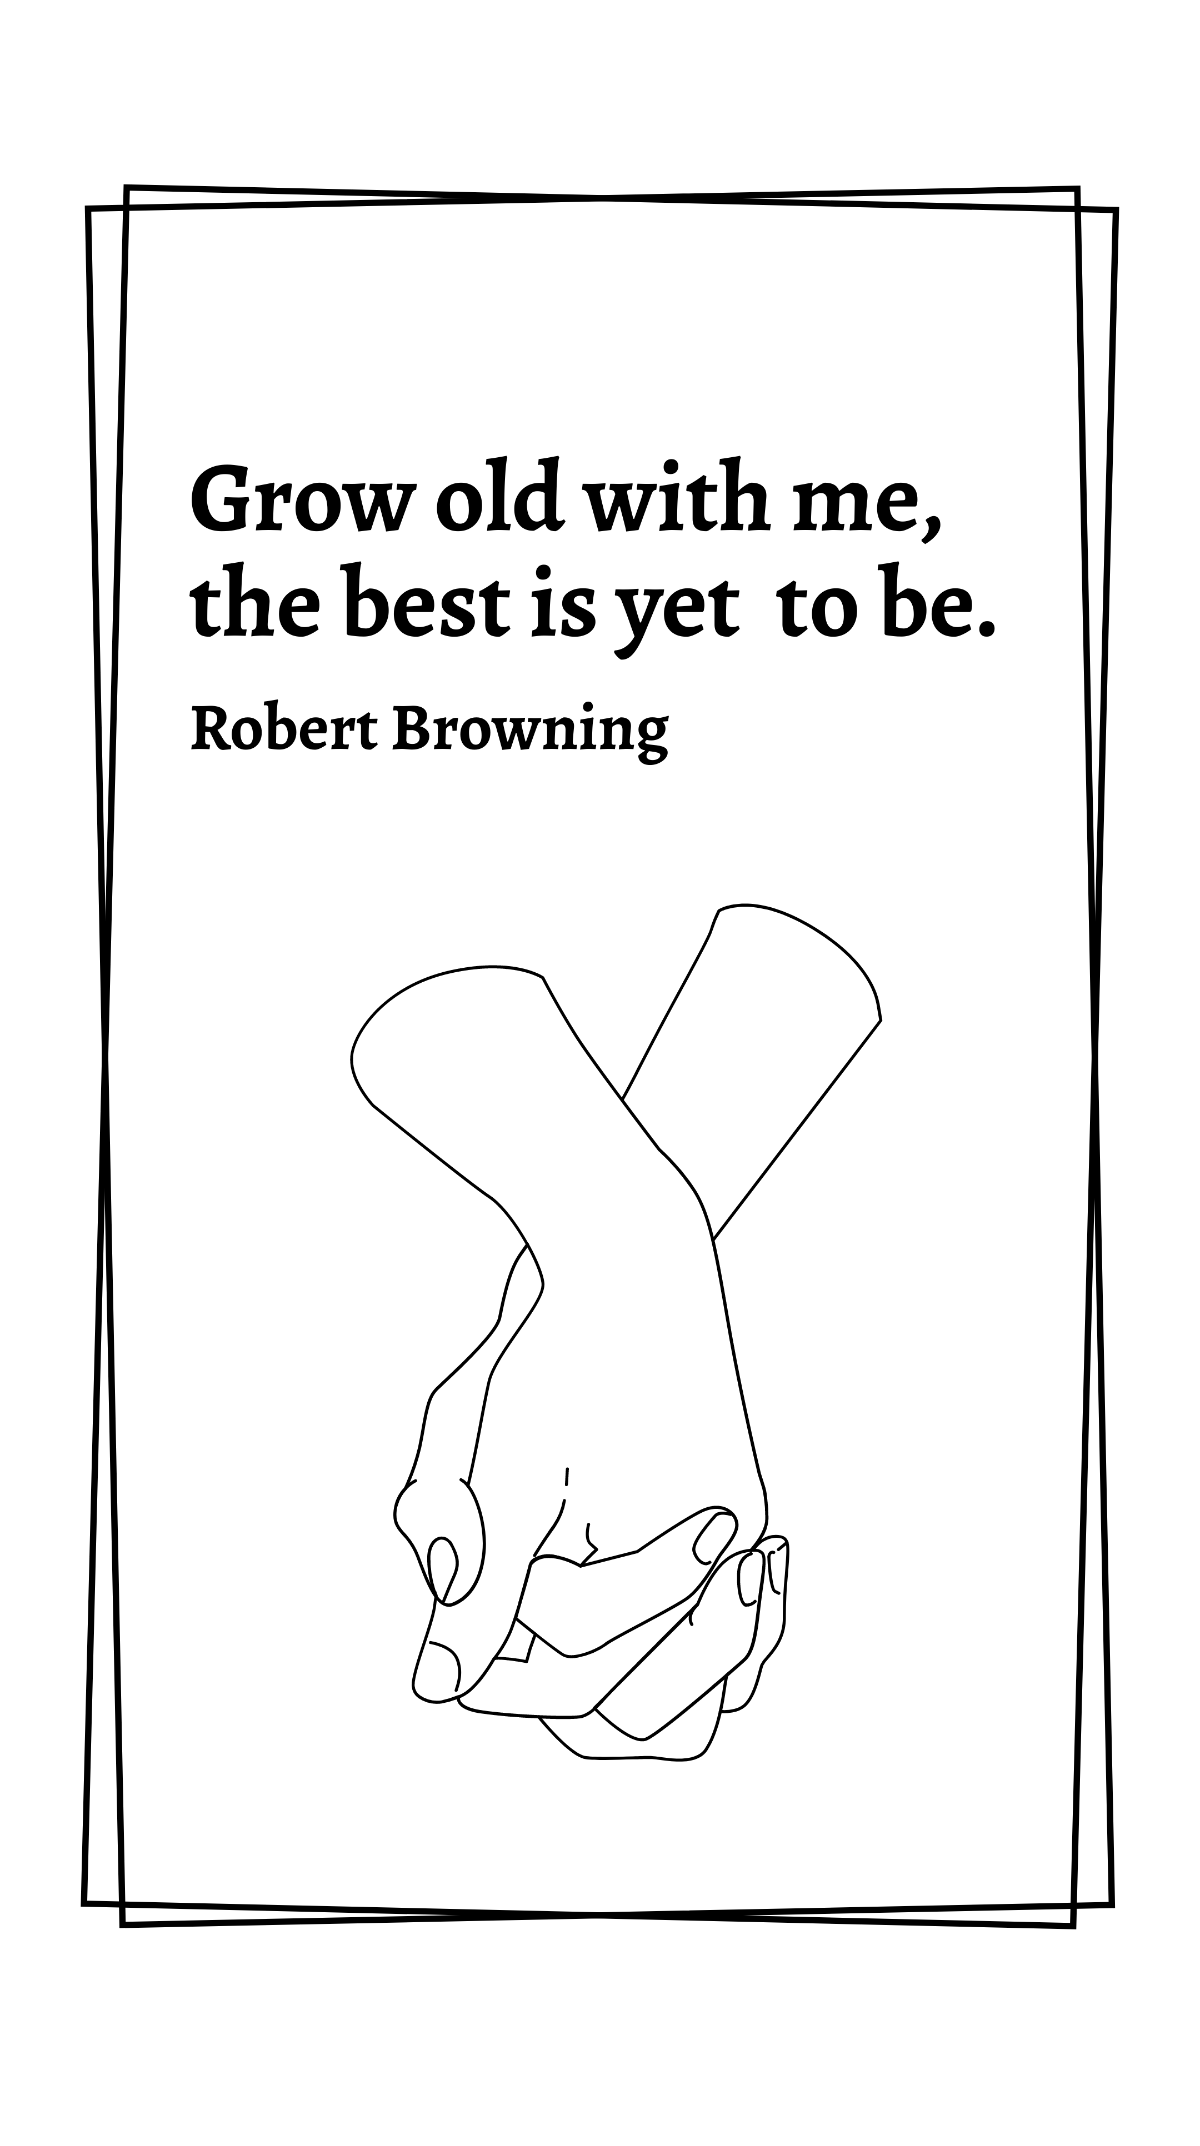 Free Robert Browning - Grow old with me, the best is yet to be. Template